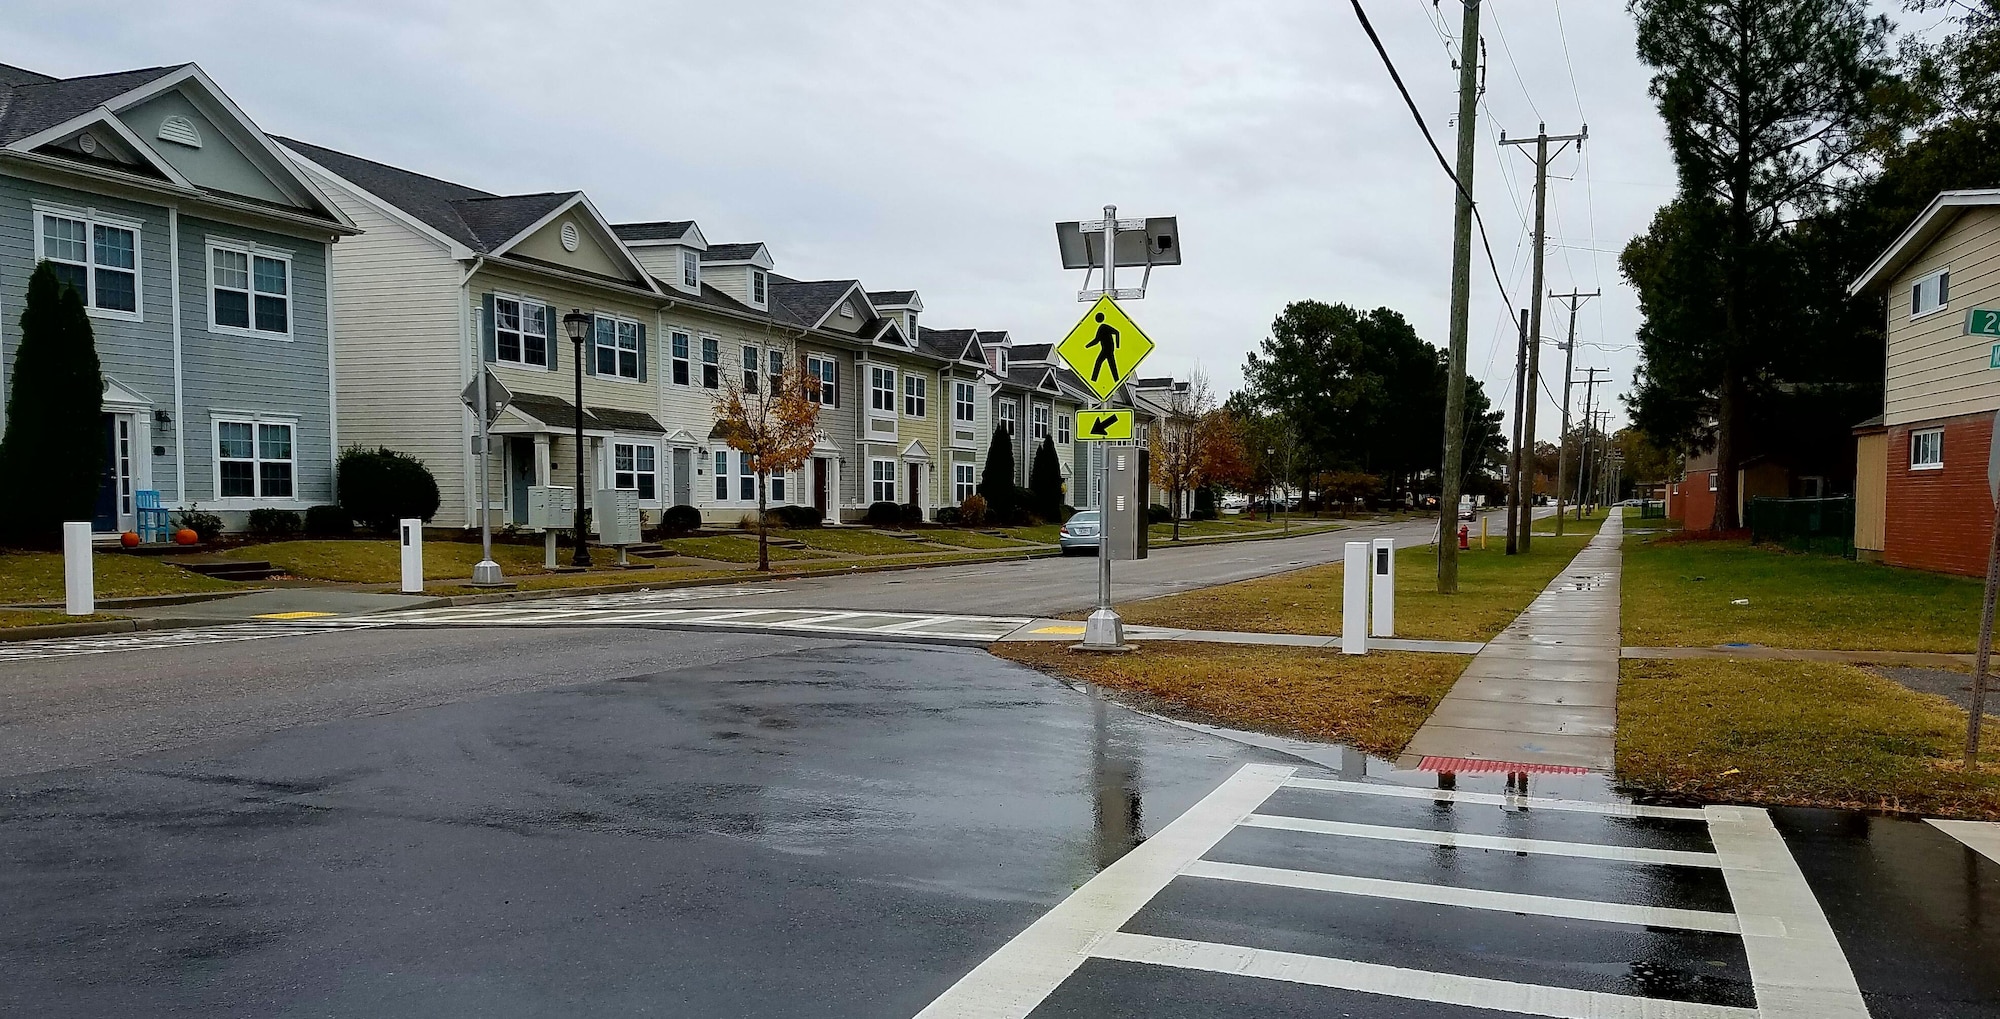 The 733rd Civil Engineer Division installed a lighted pedestrian crosswalk at 26th Street and Madison Avenue, near a school bus stop at Joint Base Langley-Eustis, Va., Nov. 14, 2016. The 733rd CED coordinated with the Fort Eustis Residential Working Group to address pedestrian safety issues at this location. As pedestrians approach the street, motion sensors activate lights across the road to alert drivers to slow down and stop for pedestrians using the crosswalk. (U. S. Air Force photo by Beverly Joyner)